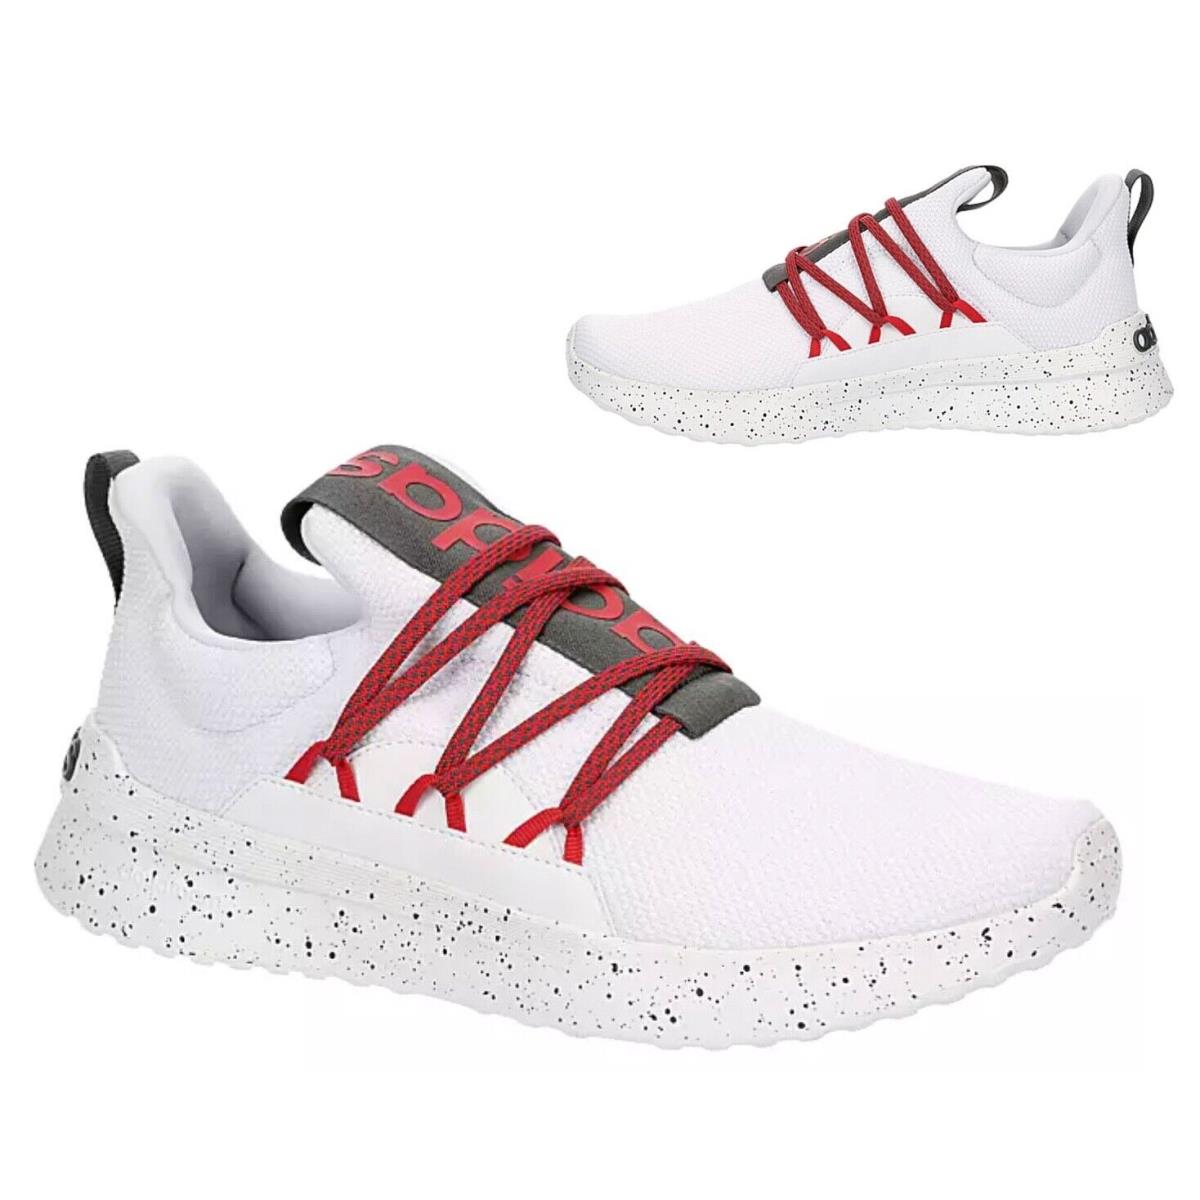 Adidas Racer Adapt Athletic Sneaker Casual Shoes Mens White Red All Sizes